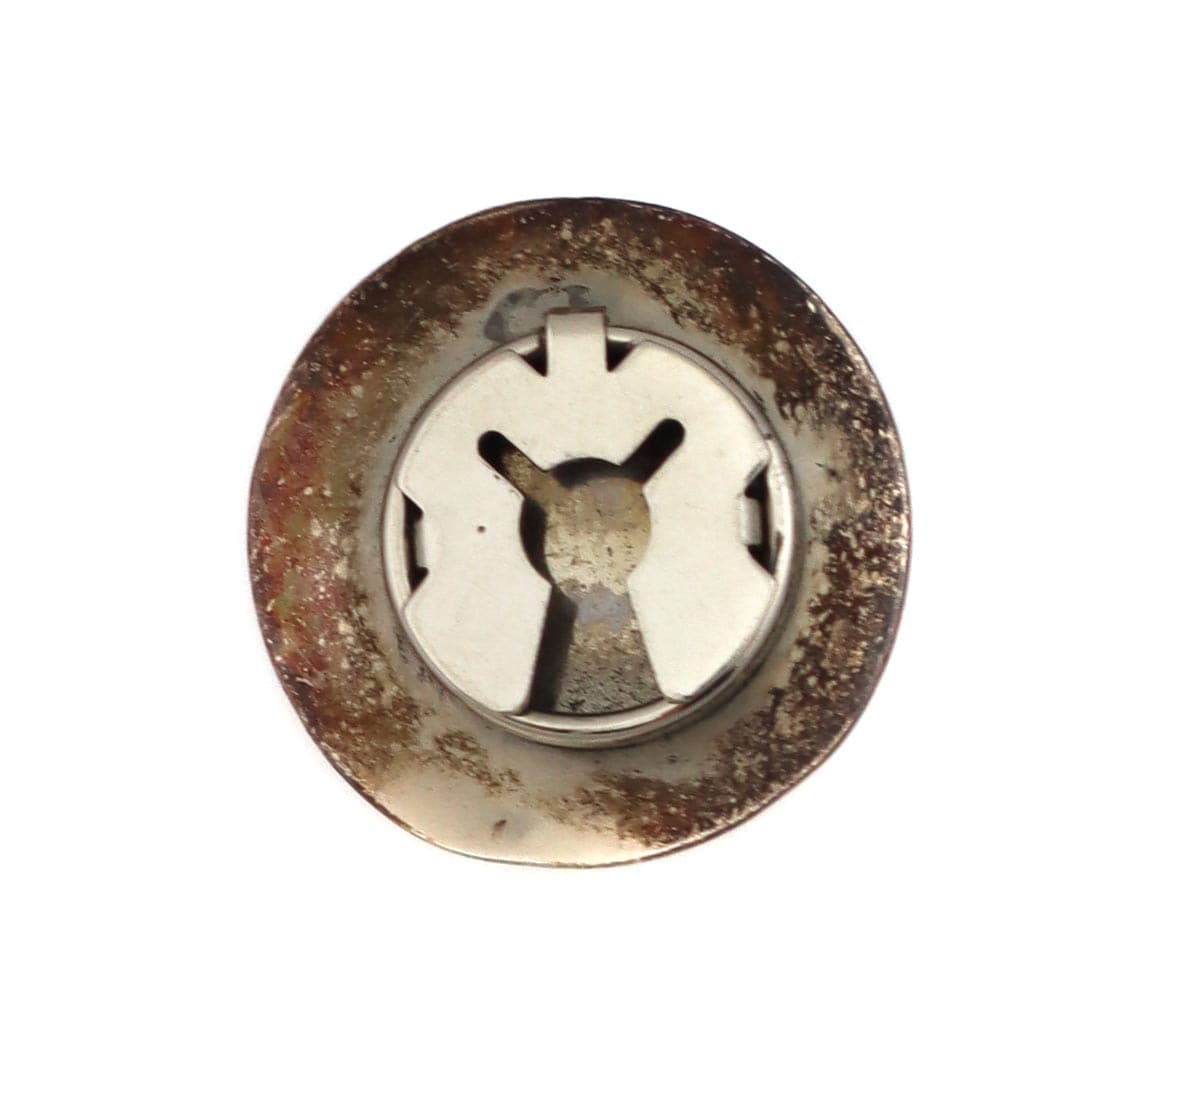 Hopi Silver Button Cover with Stamped Design c. 1940-50s, 1.125" diameter (J14165-03) 1